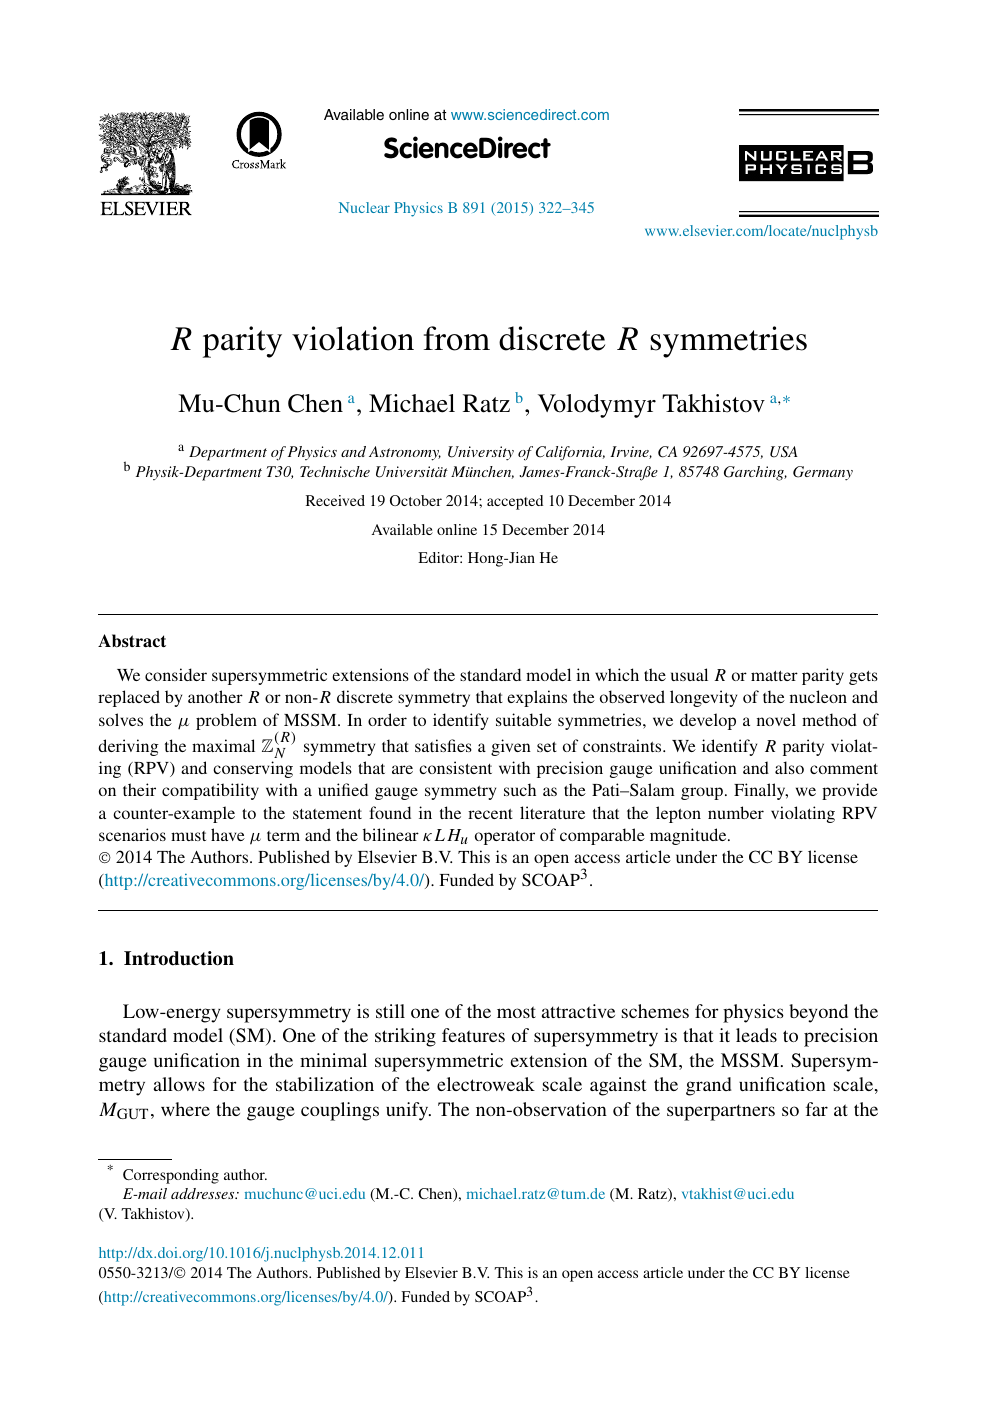 R Parity Violation From Discrete R Symmetries Topic Of Research Paper In Physical Sciences Download Scholarly Article Pdf And Read For Free On Cyberleninka Open Science Hub